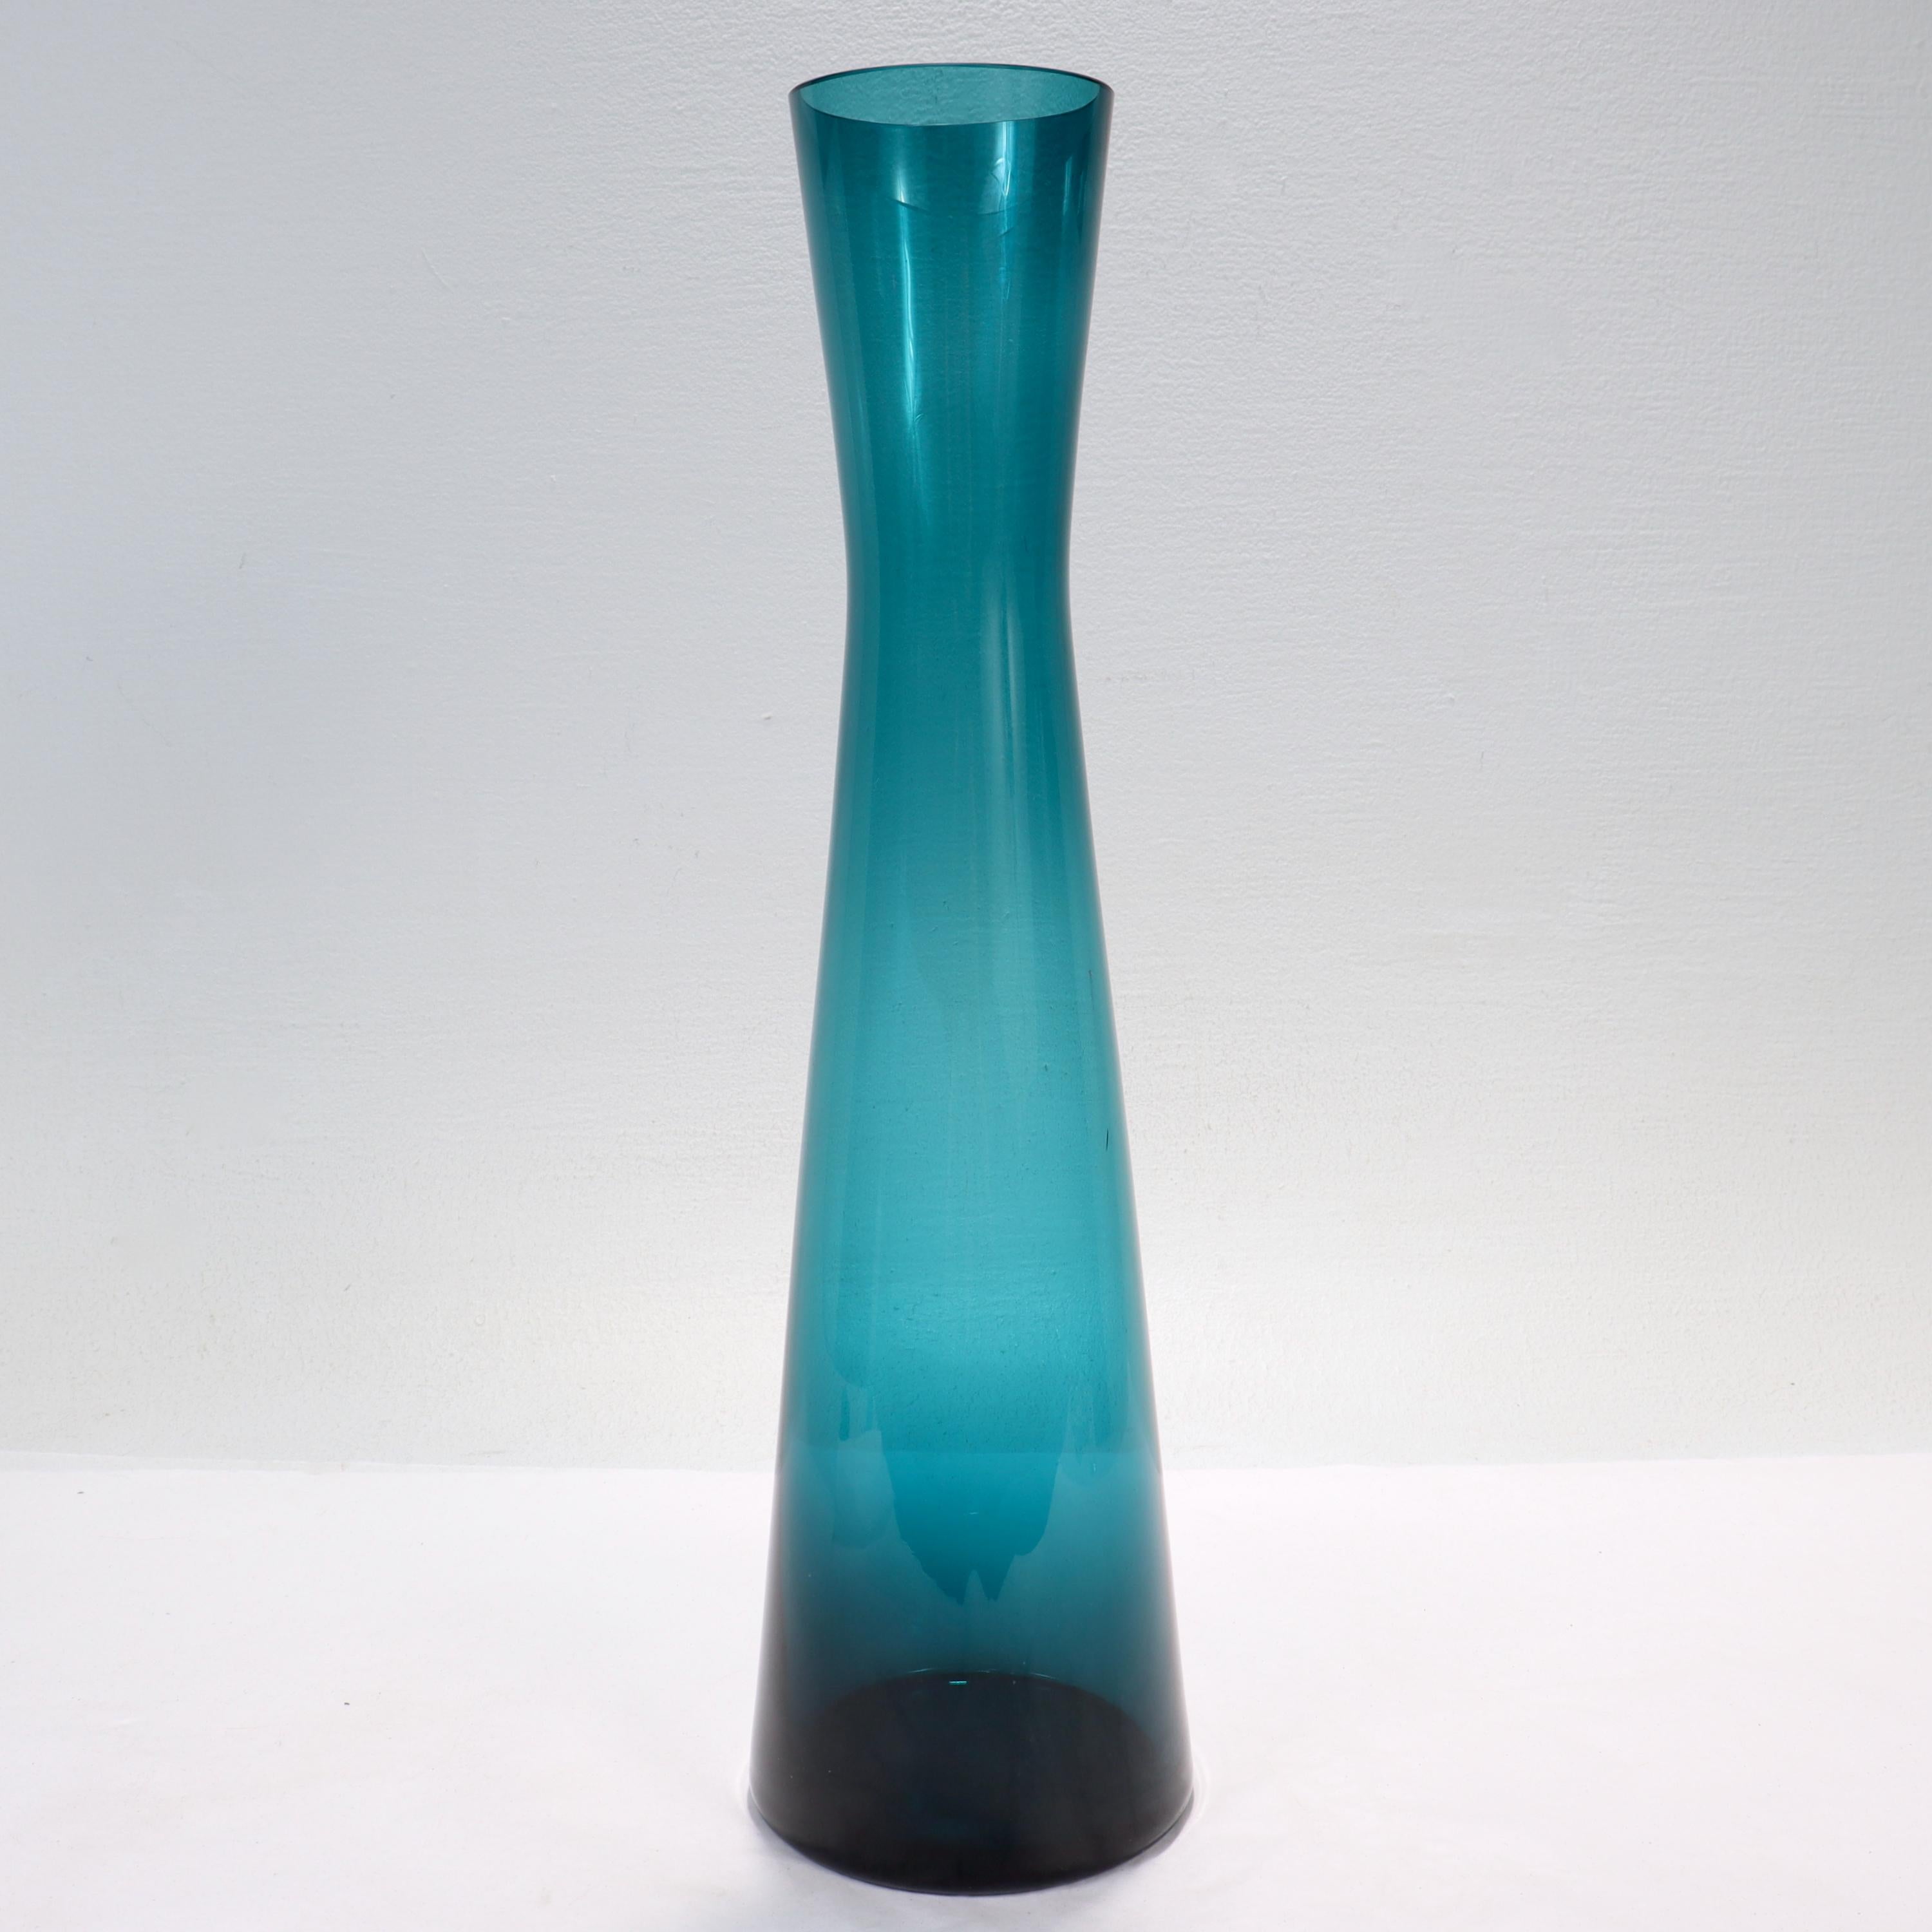 A fine Mid-Century Modern art glass vase.

Attributed to Gullaskruf.

Simply a great vase!

Date:
Mid-20th Century

Overall Condition:
It is in overall good, as-pictured, used estate condition with no chips, cracks, or repairs, some fine &